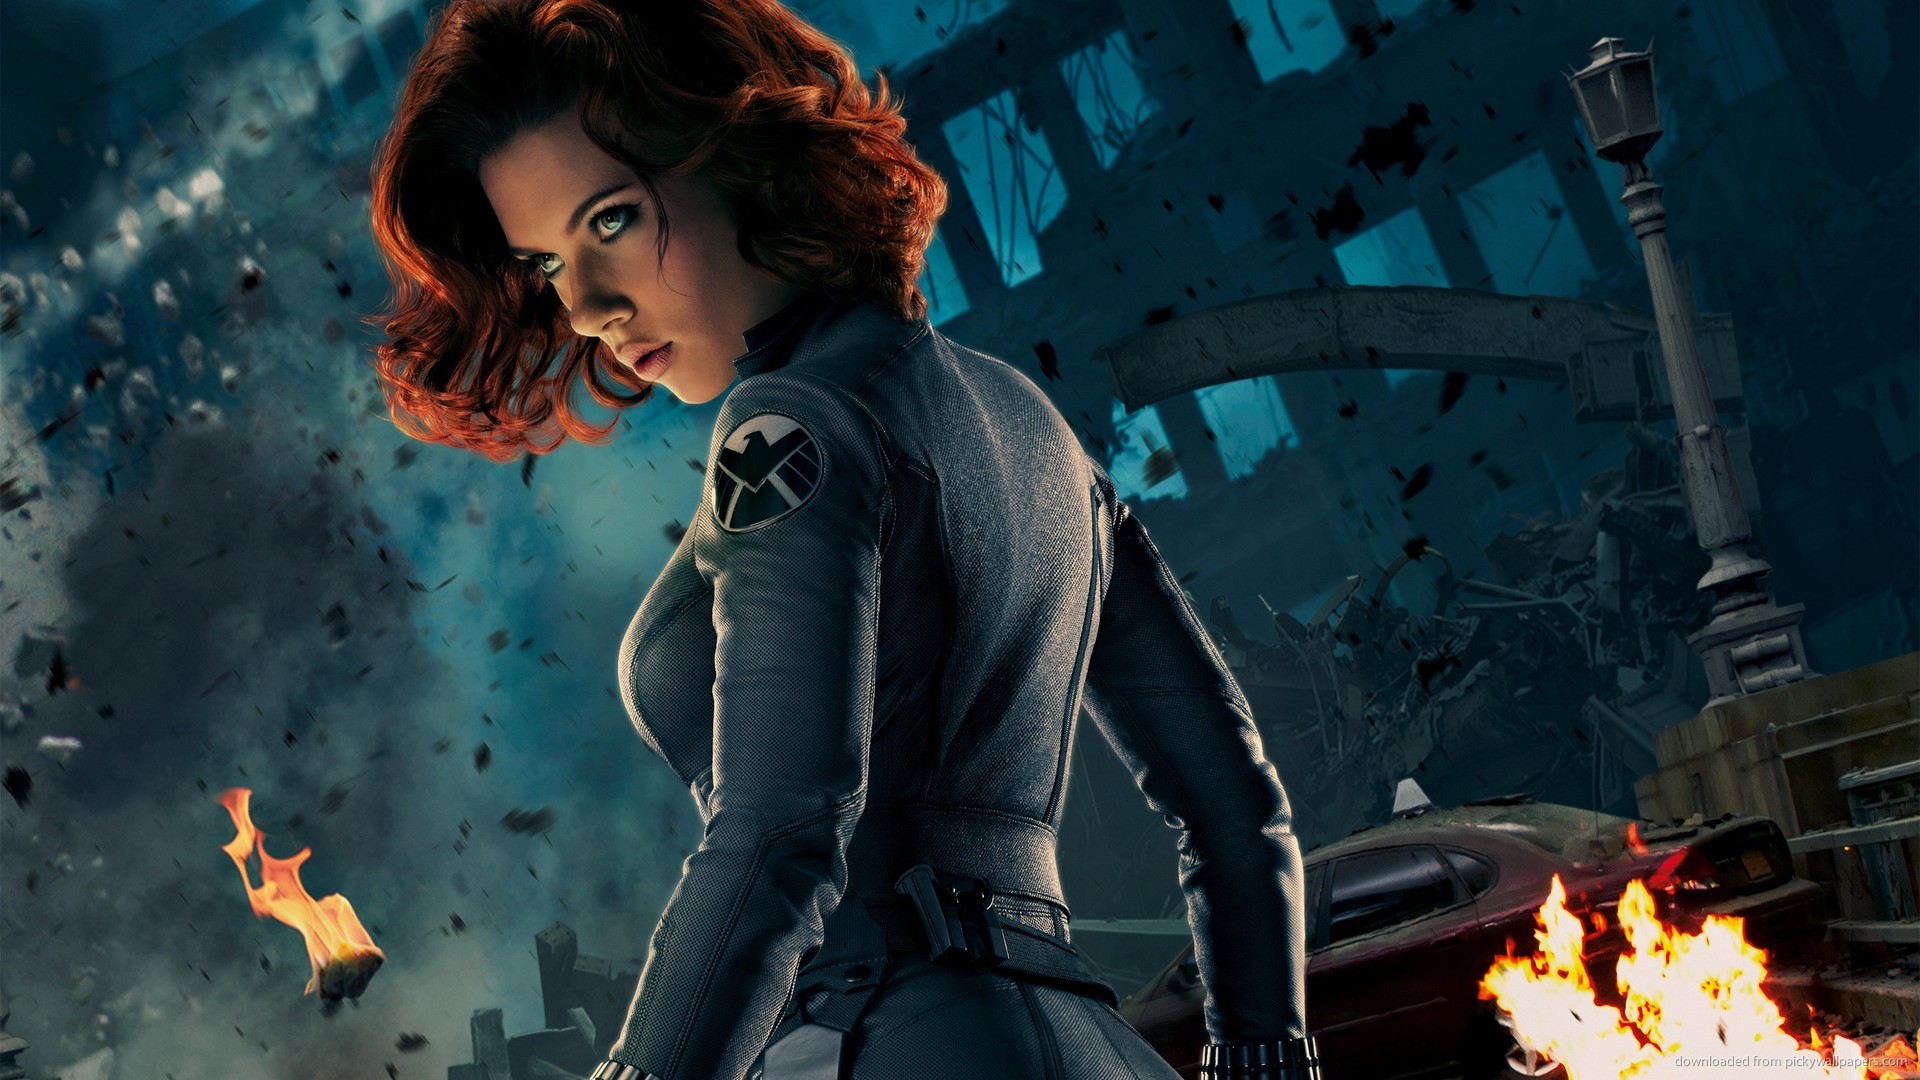 1920x1080 ... films both confirmed for the near future, and talks of a Black Widow  stand-alone film often thrown around, are we in a new era of female  superheroes?